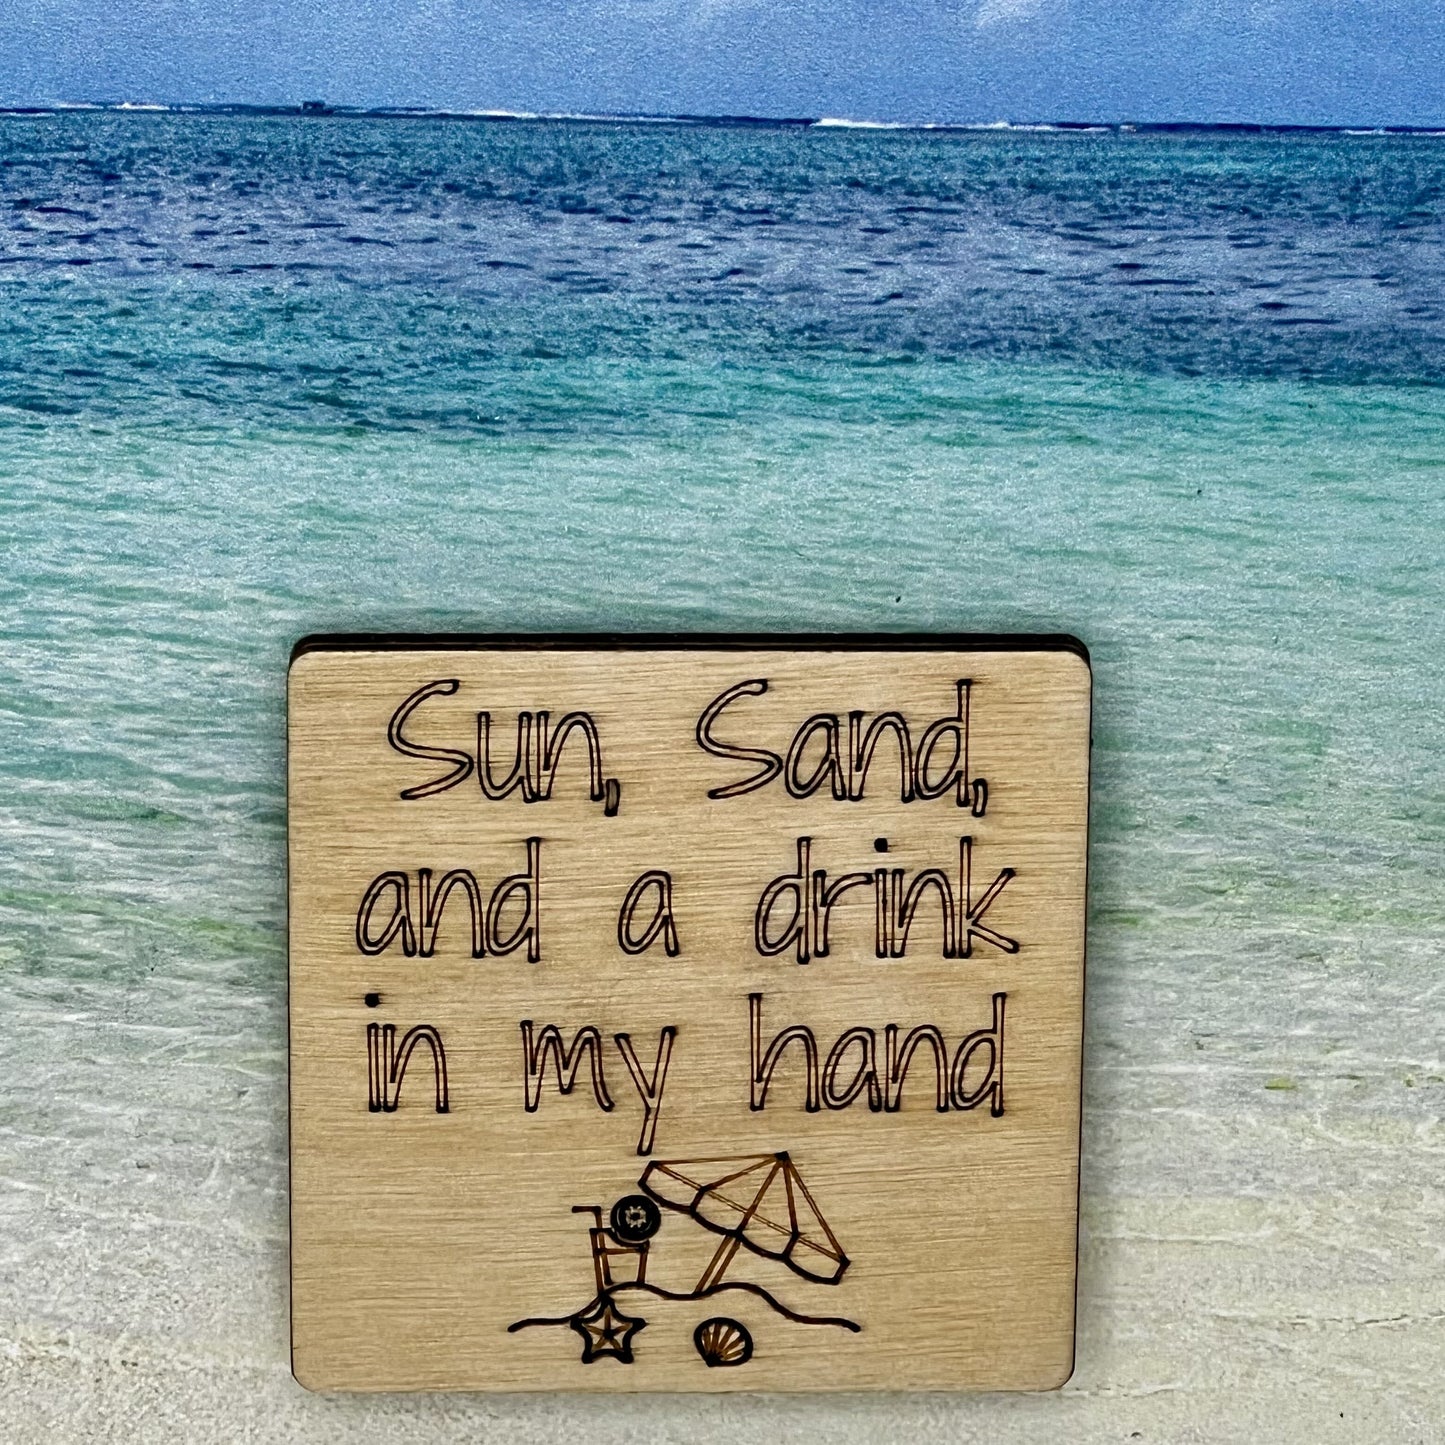 2”x2” wooden square with “Sun, Sand, and a Drink in My Hand" and a beach scene, laser engraved. Background scene is a tropical ocean.